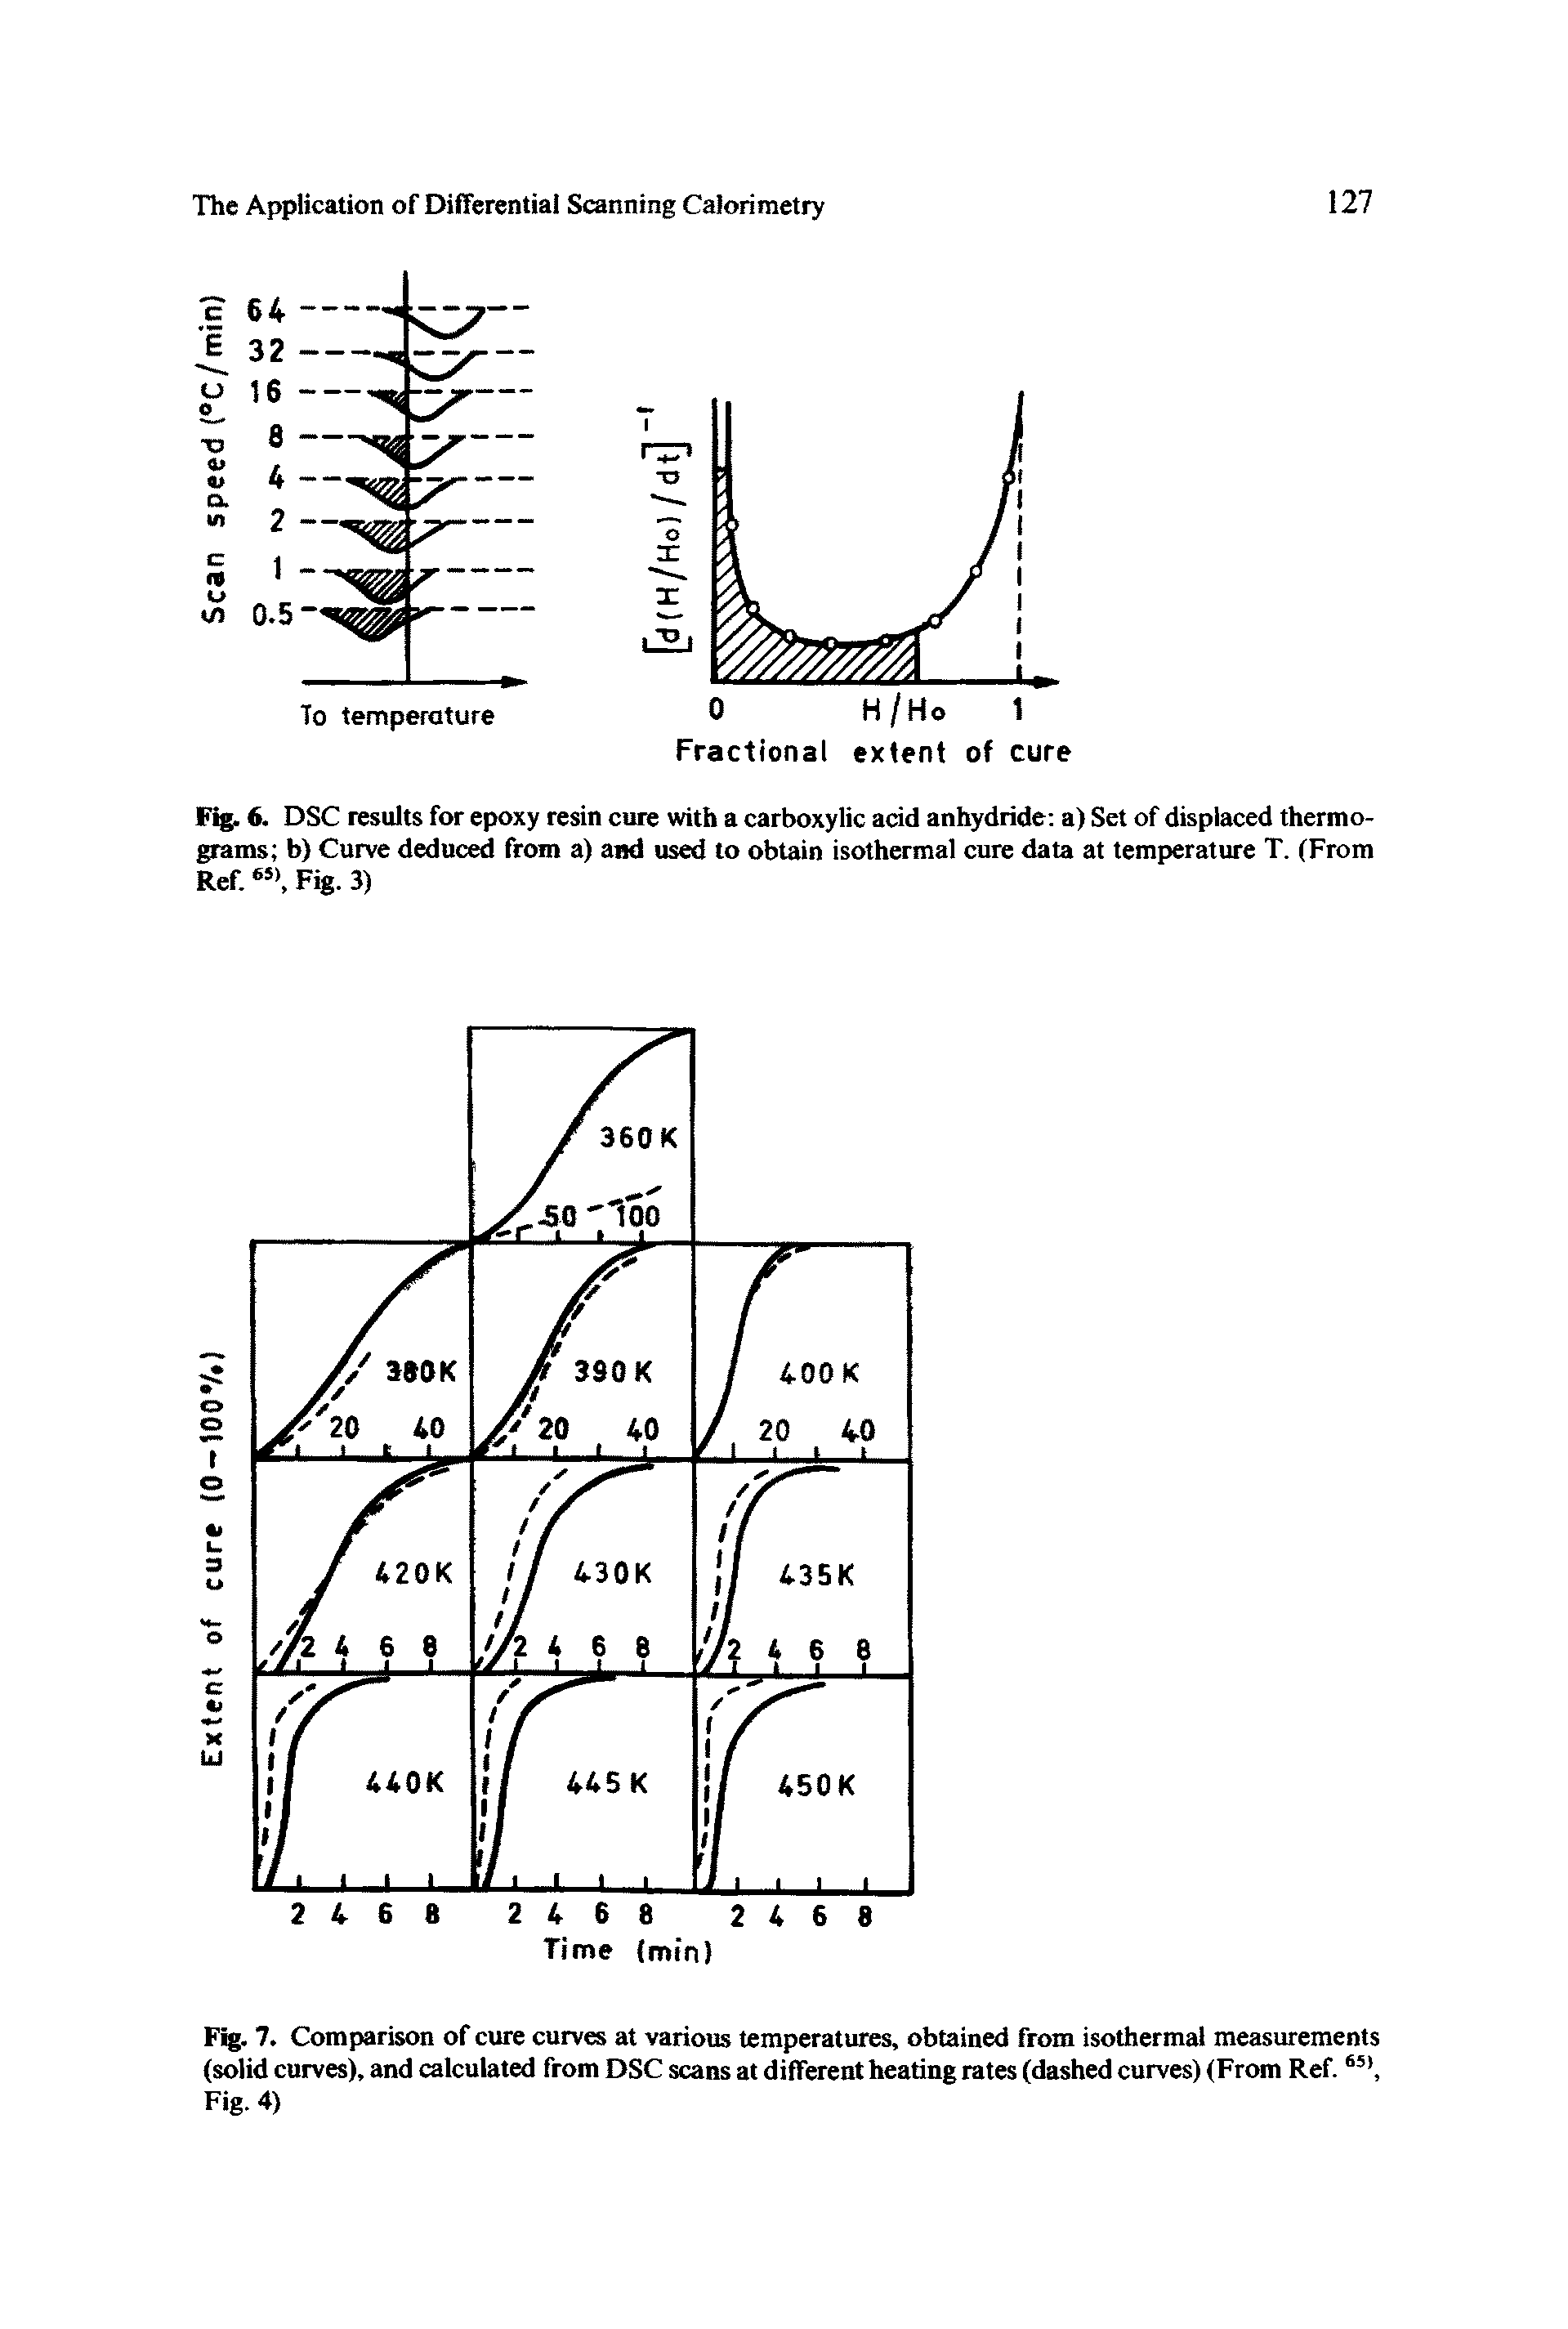 Fig. 7. Comparison of cure curves at various temperatures, obtained from isothermal measurements (solid curves), and calculated from DSC scans at different heating rates (dashed curves) (From Ref. 65 Fig. 4)...